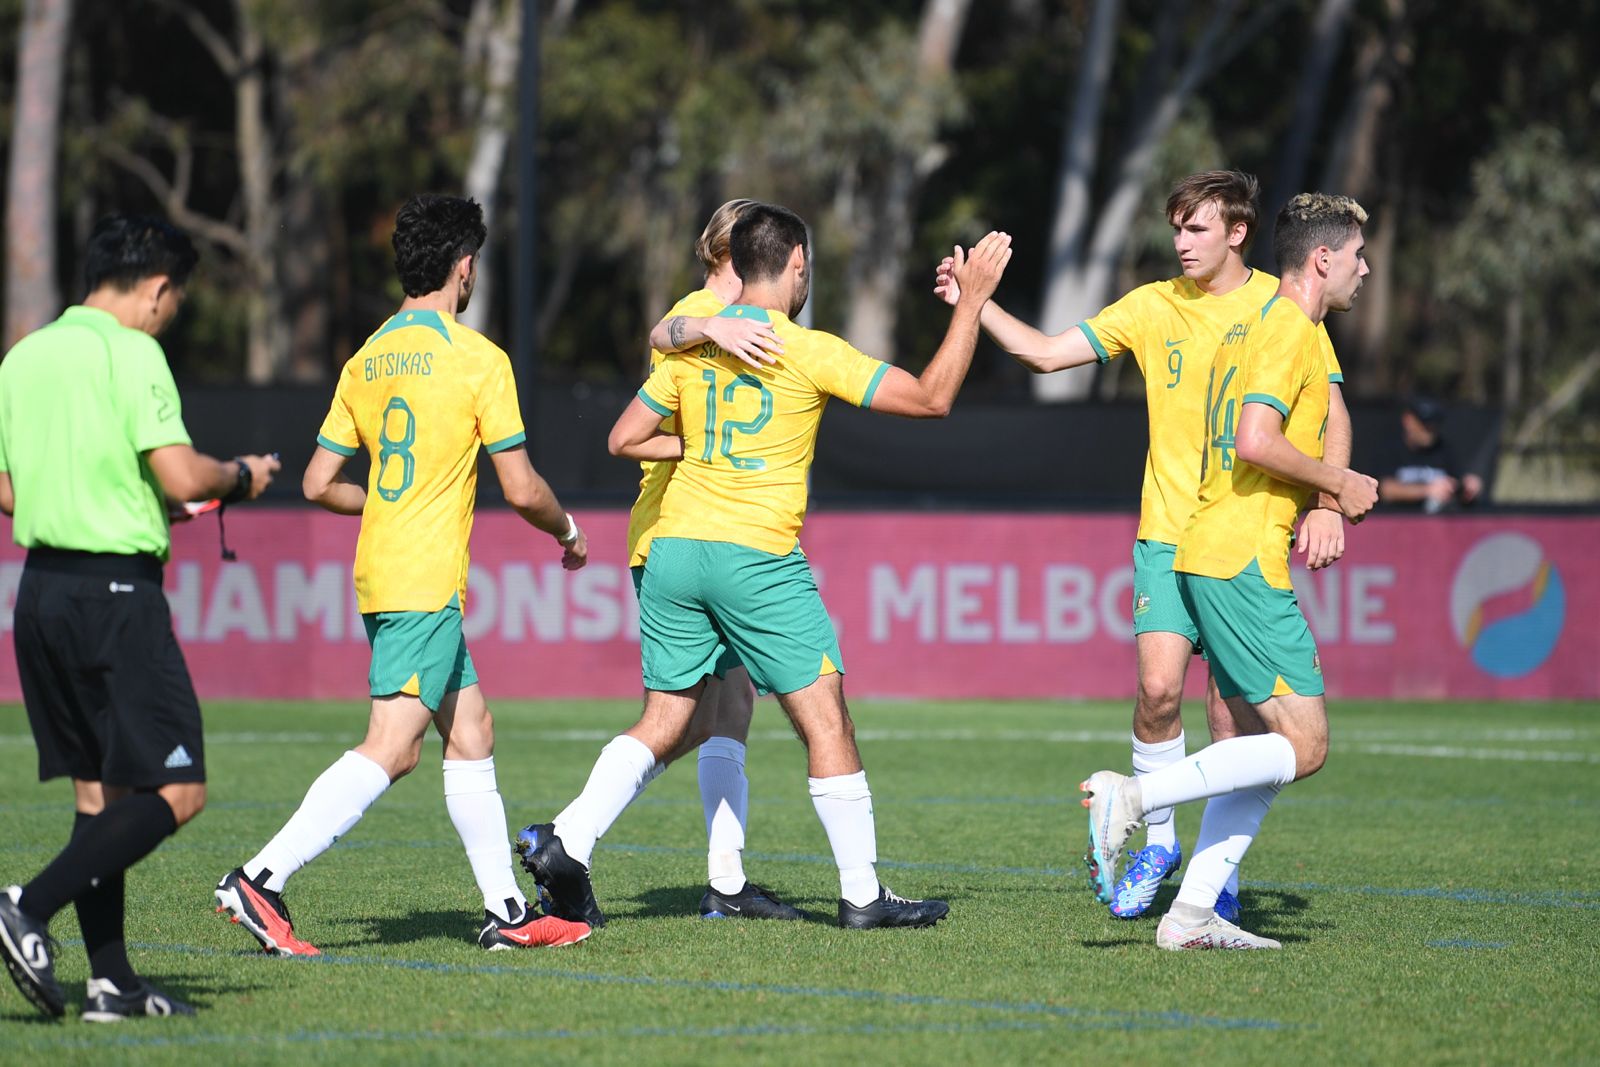 CommBank Pararoos celebrate scoring against India in the IFCPF Asia Oceania Championships. (L-R) - Christian Bitsikas, Taj Lynch, Ben Sutton, Luc Launder, Augustine Murphy